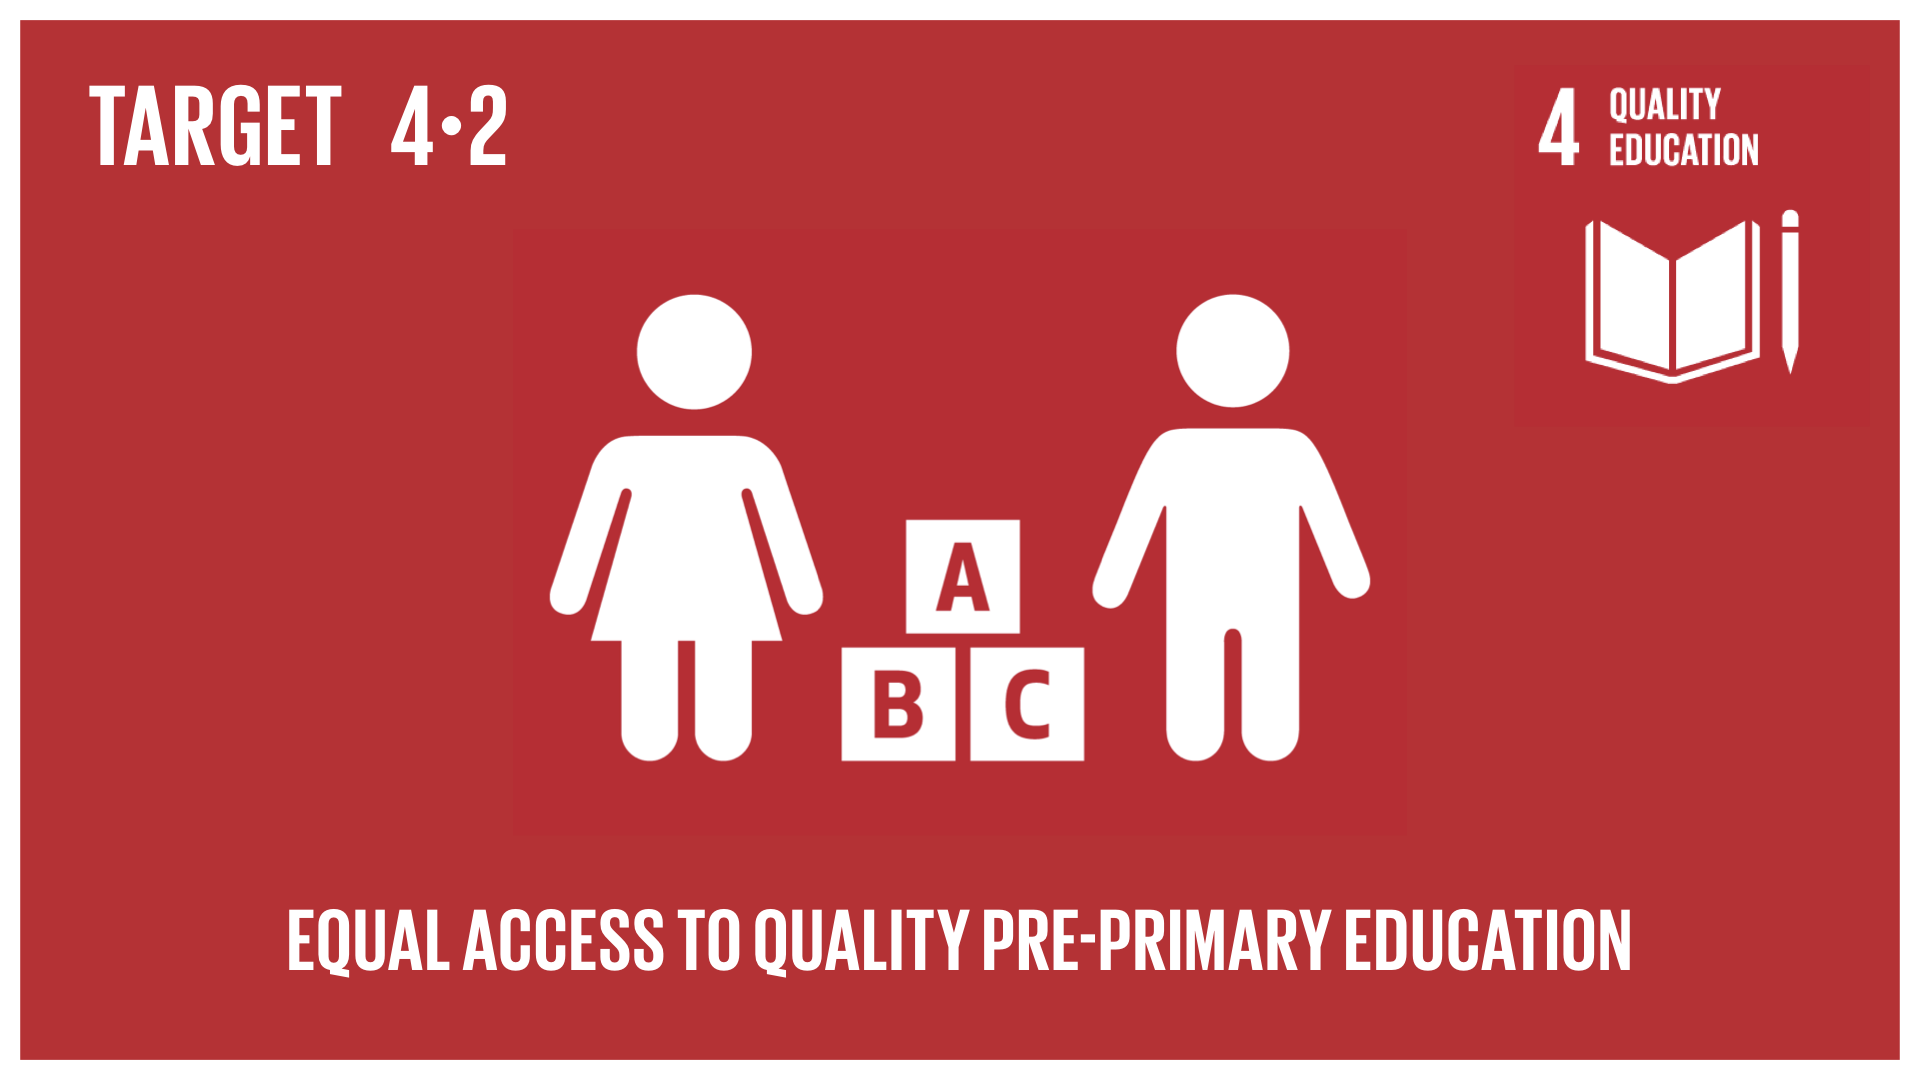 Graphic displaying equal access to quality pre-primary education for all children